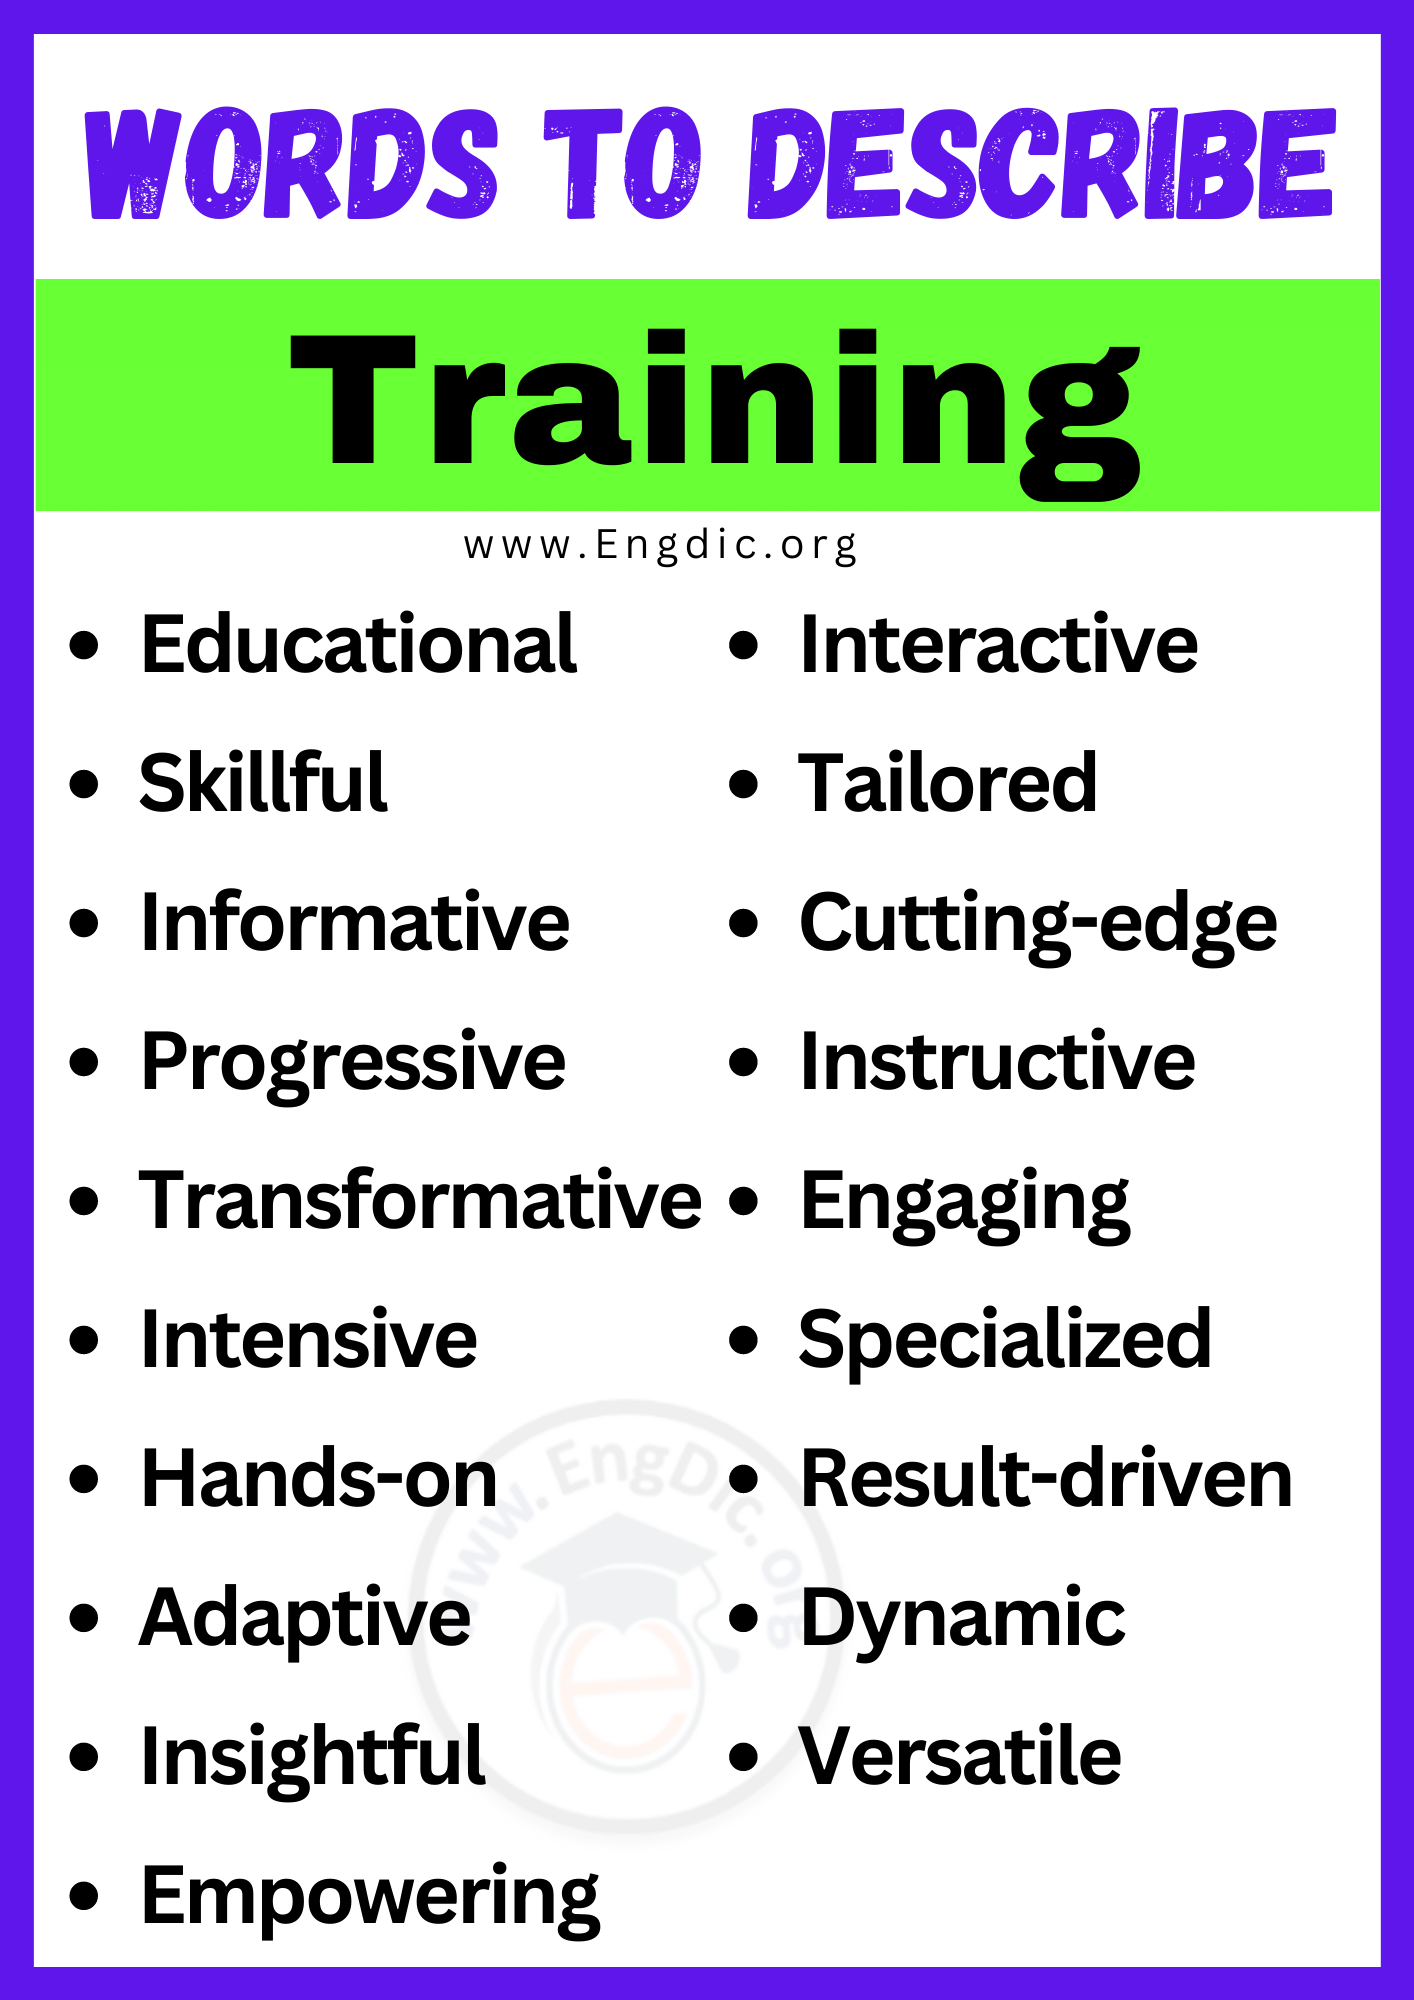 Words to Describe Training